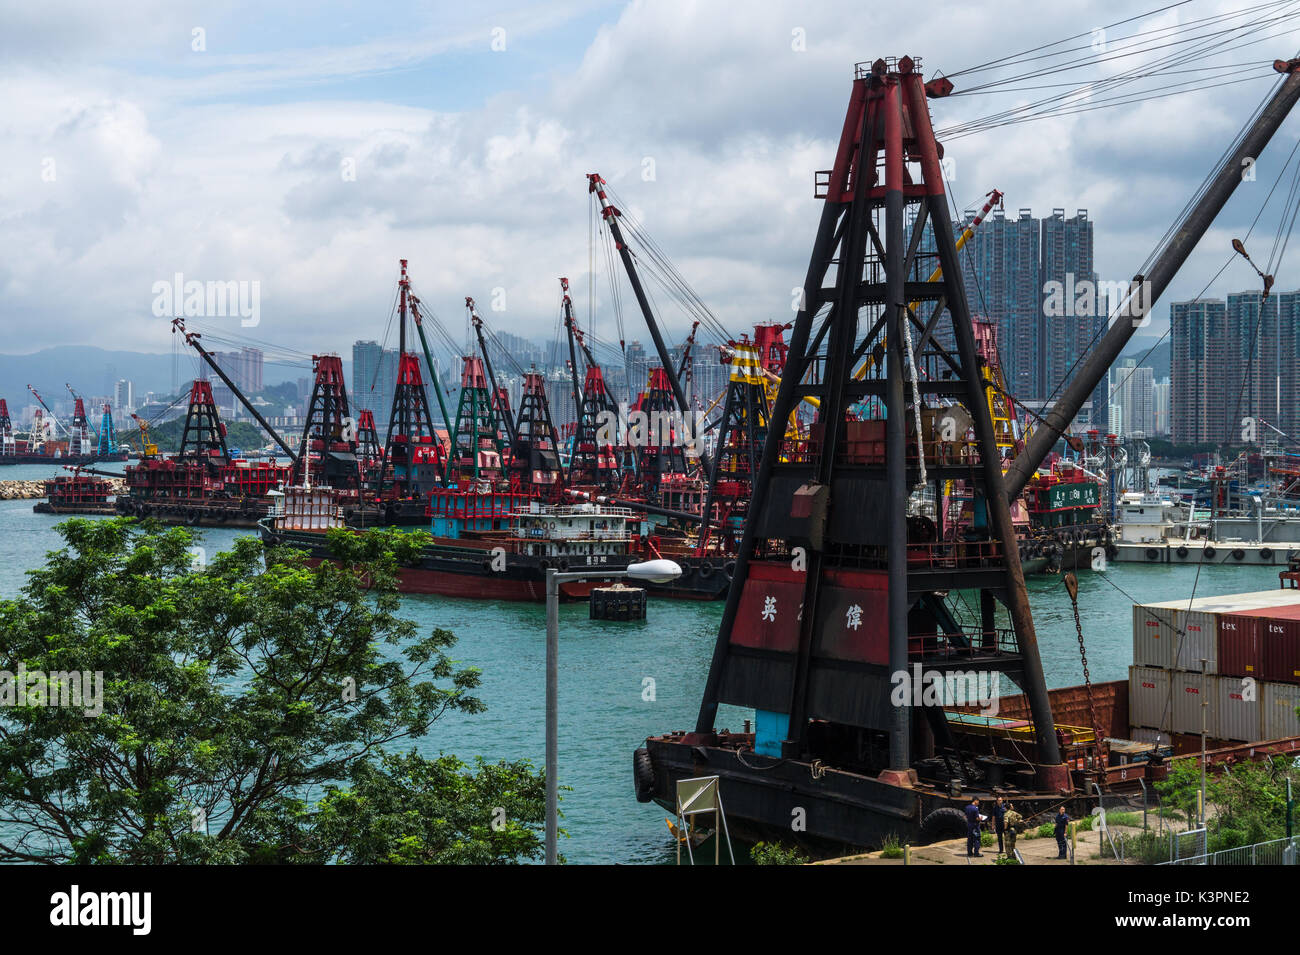 Dredging barges for land reclamation (using derrick cranes) in Victoria Harbour, Hong Kong Stock Photo